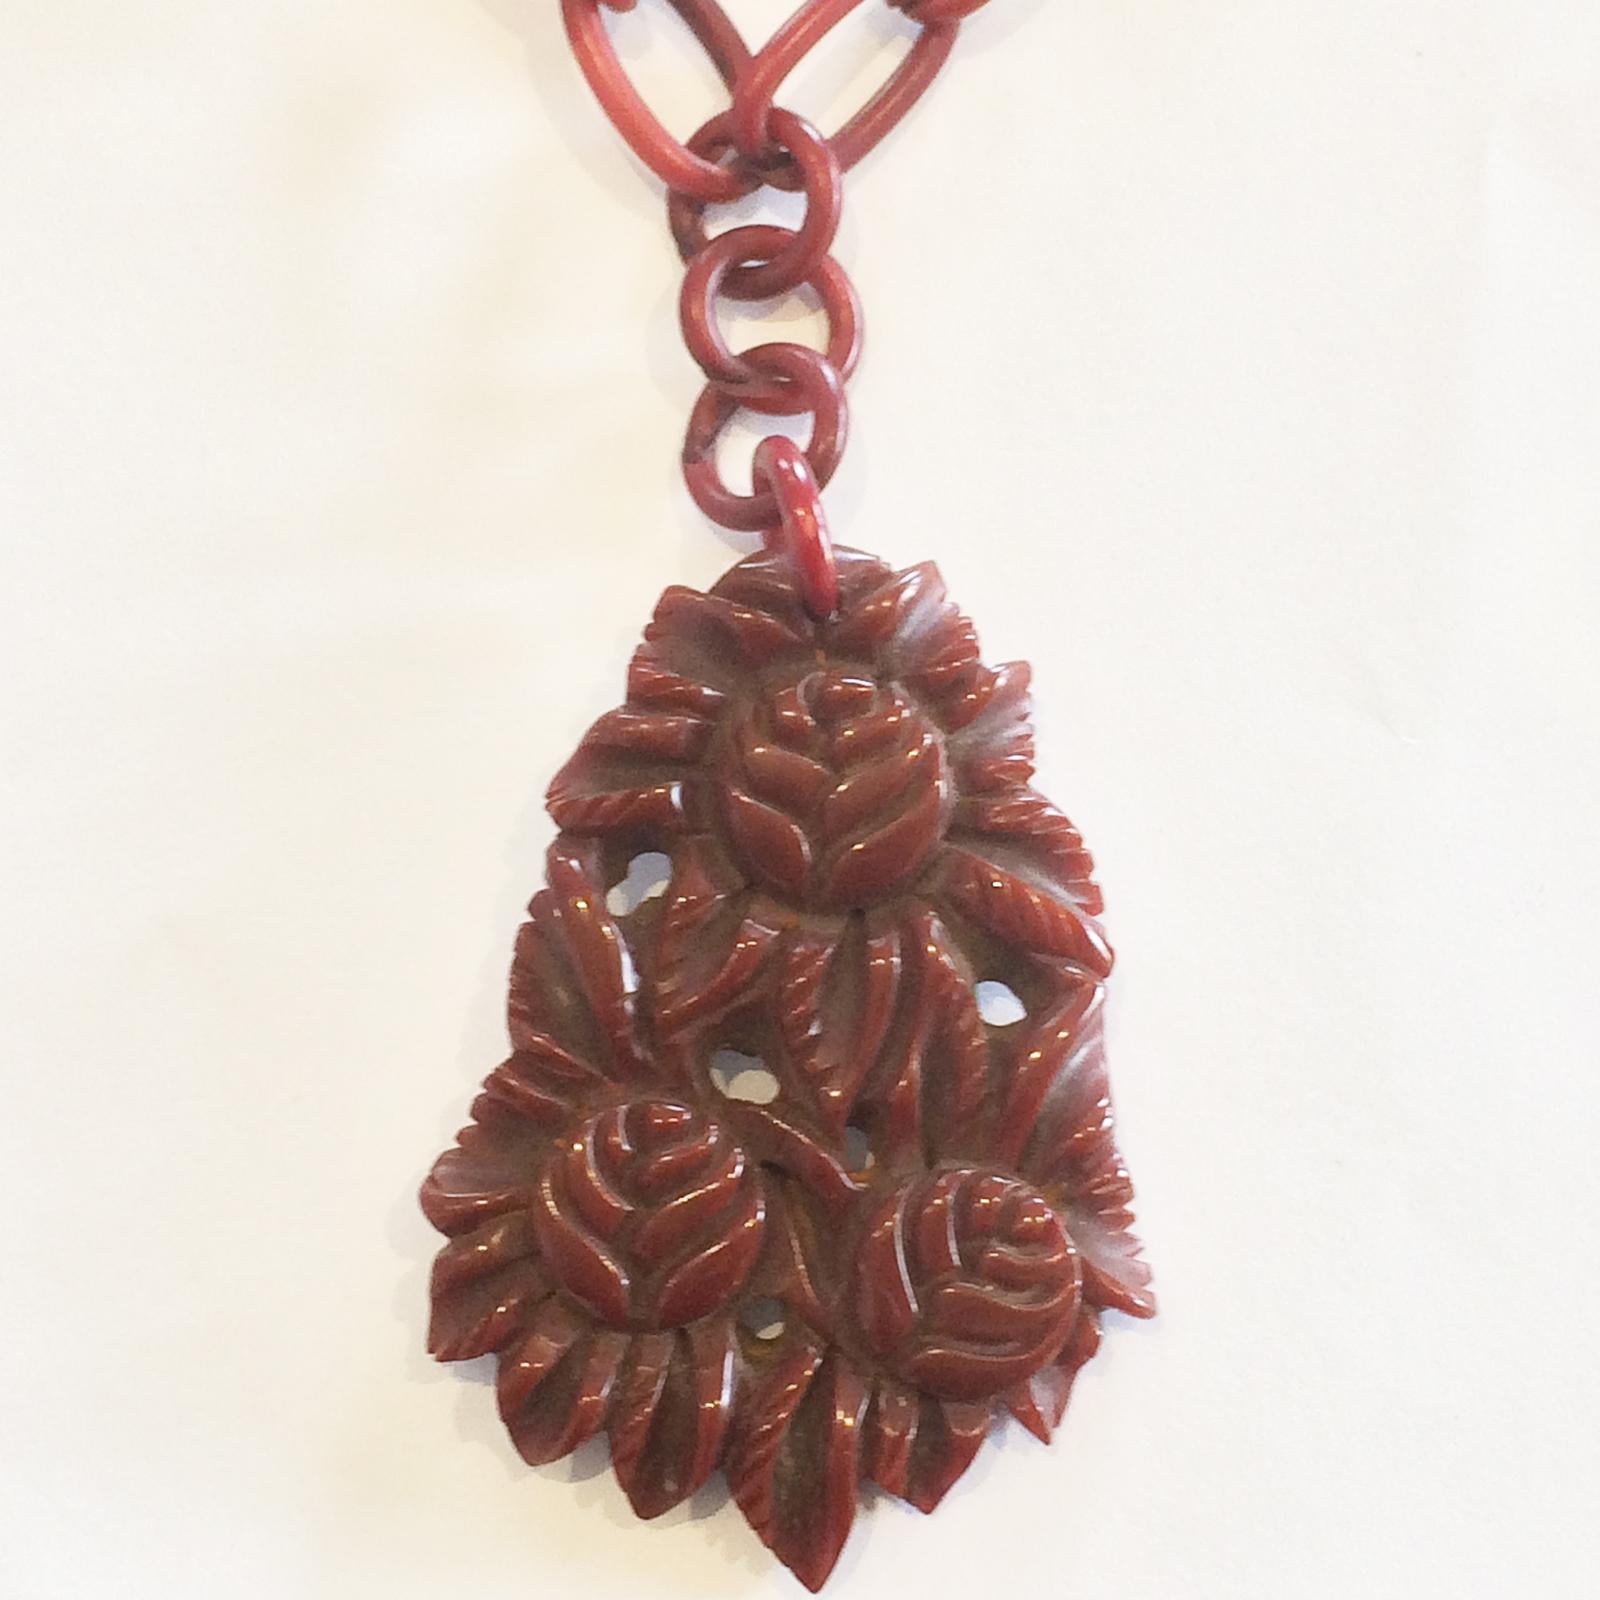 Art Deco Necklace of Deep Red, pierced and heavily carved, in Roses and Leaves Pendant, hanging on 3 links of the original, full perimeter, Deep Red Celluloid link necklace. All in perfect original condition. Extremely rare that the Chain is